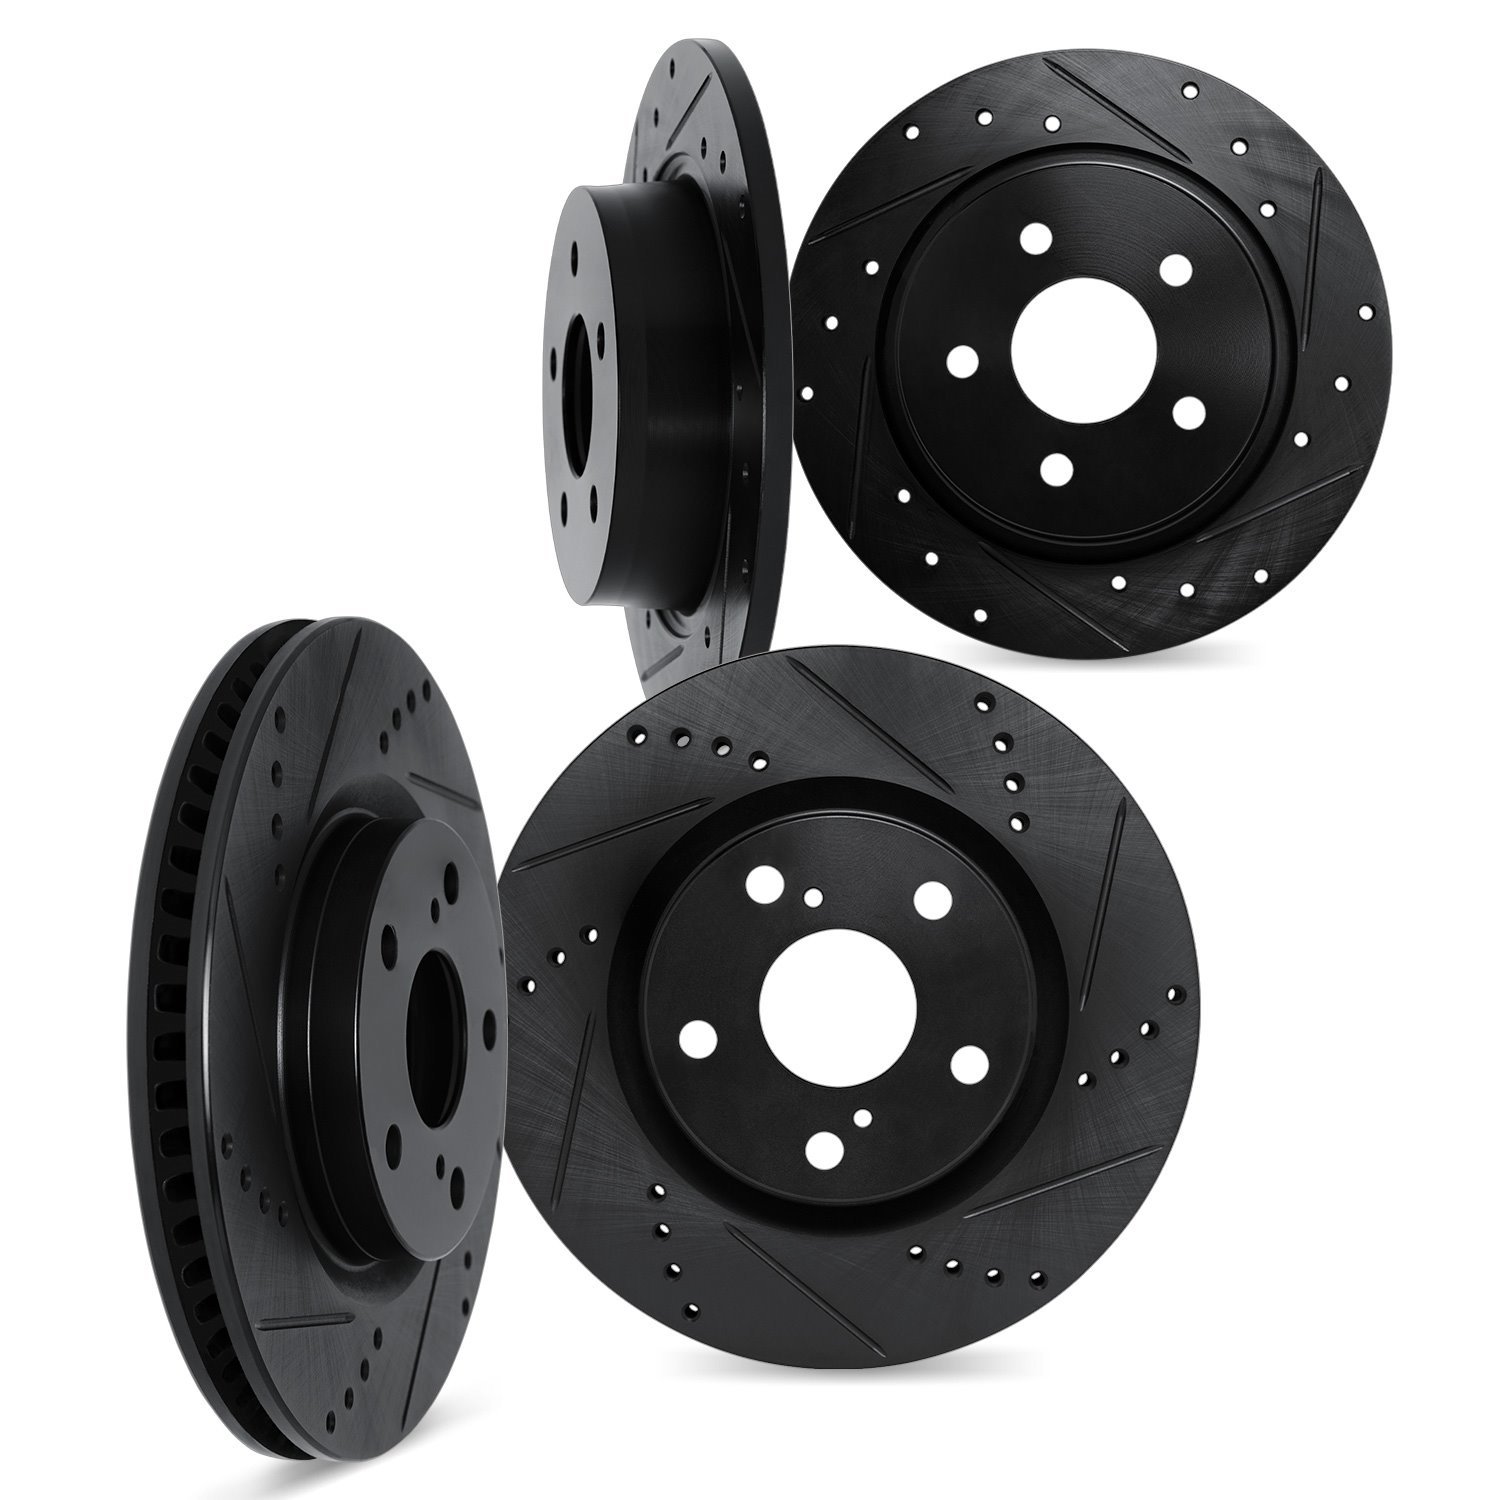 8004-68006 Drilled/Slotted Brake Rotors [Black], 1990-1996 Infiniti/Nissan, Position: Front and Rear